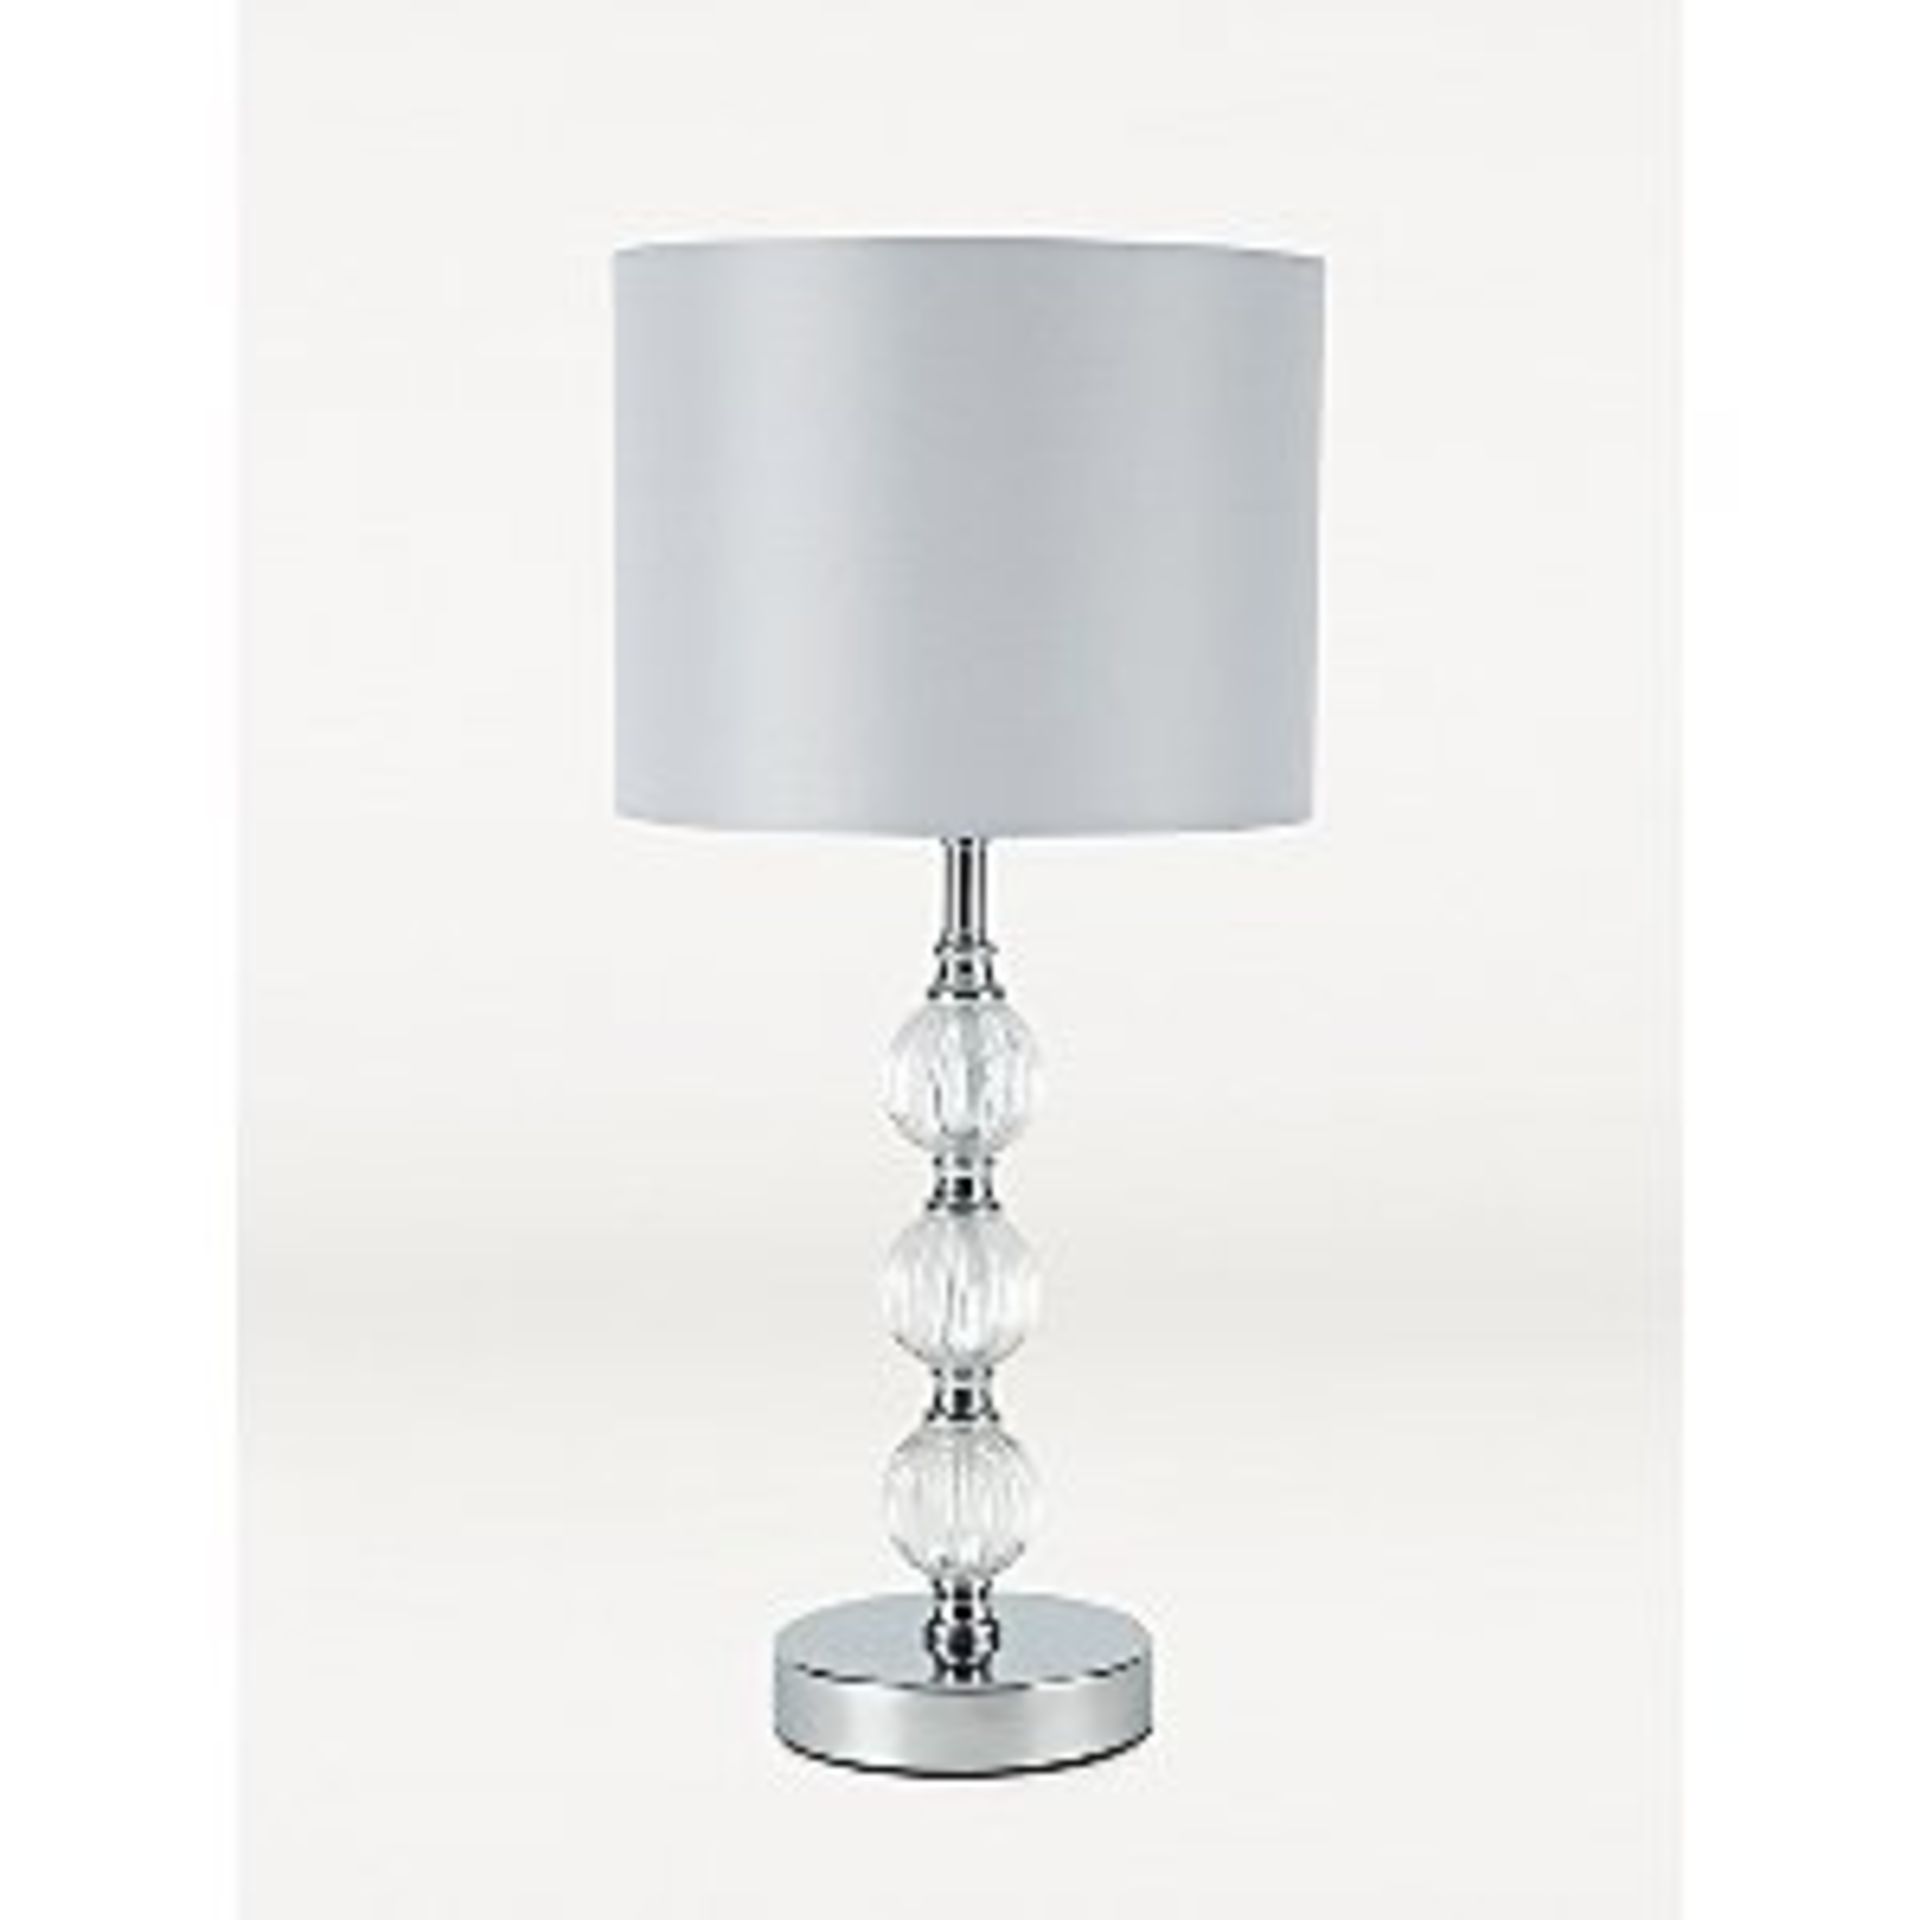 3x Lighting Items. 1x White Beaded Pendant Light Shade RRP £40 (Tag Attached). - Image 2 of 9